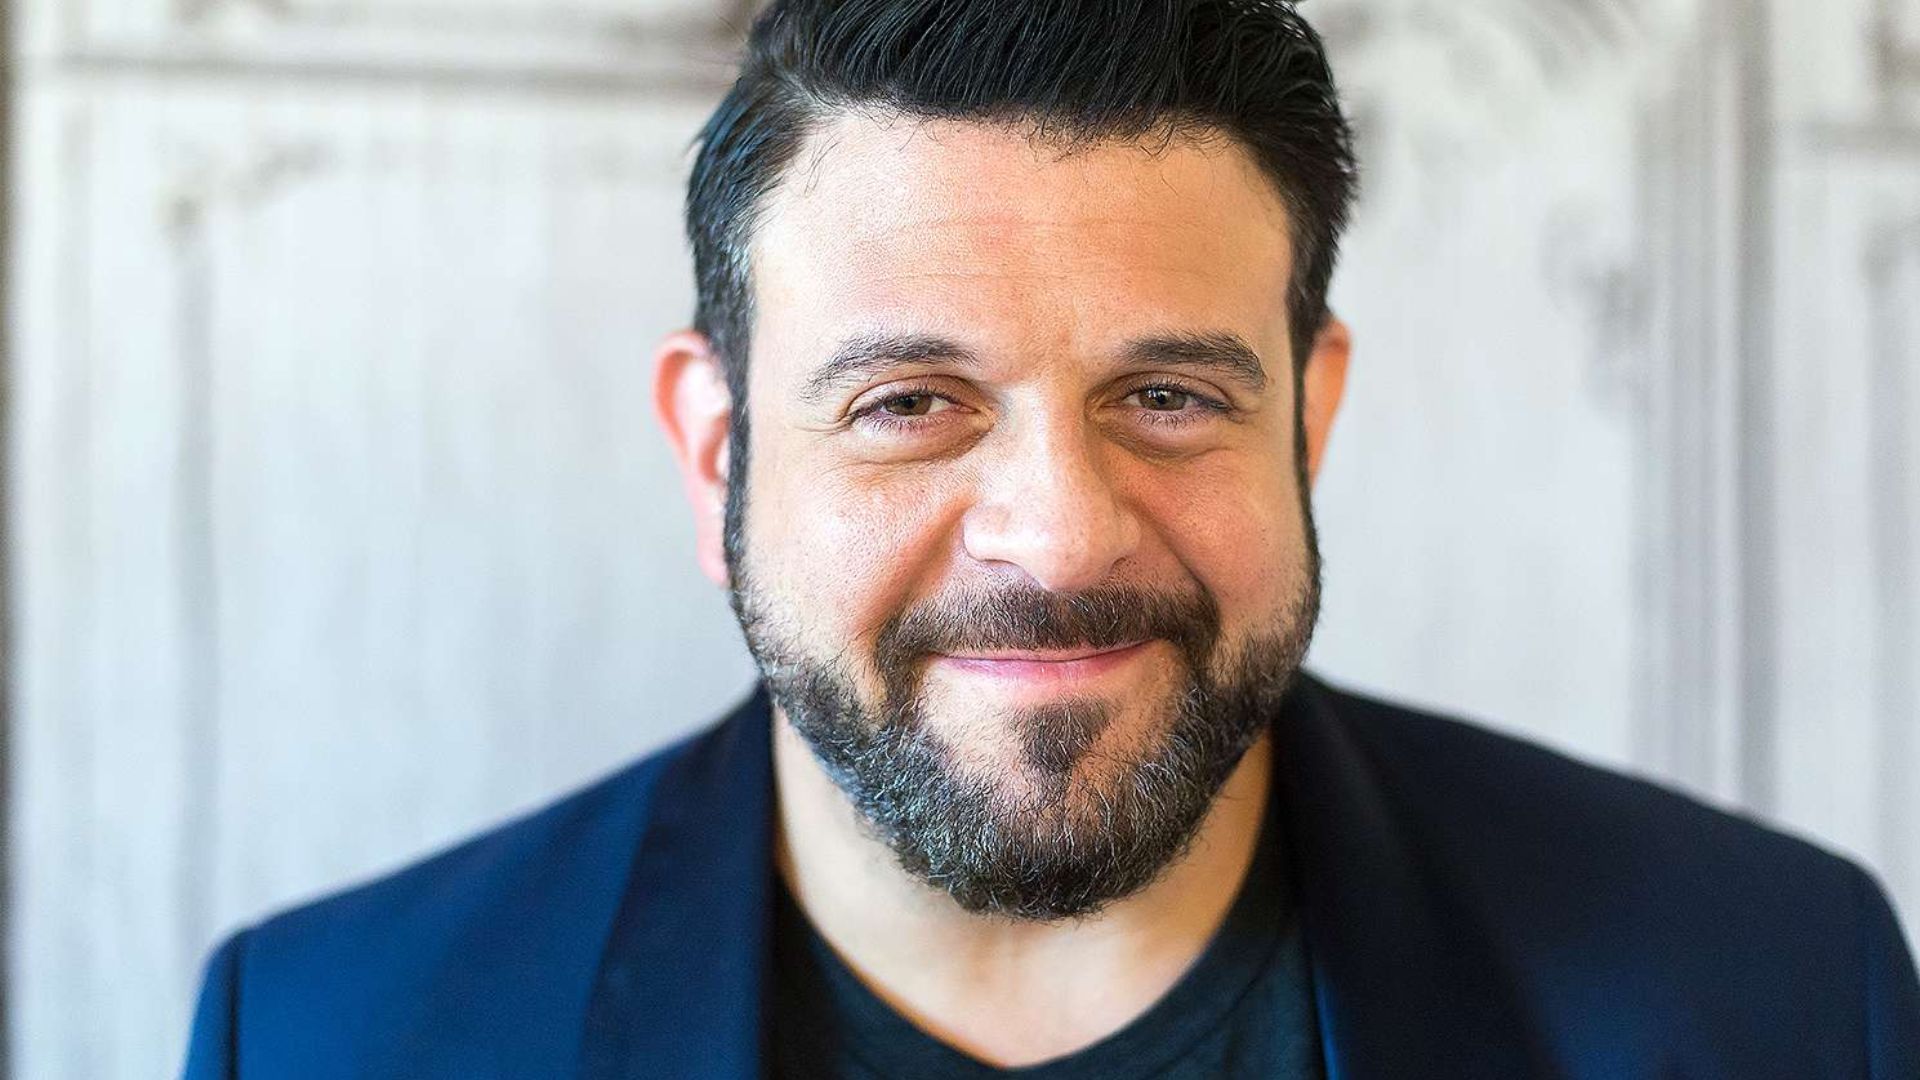 Adam Richman With Eyes Half Closed And Smiling With Lips